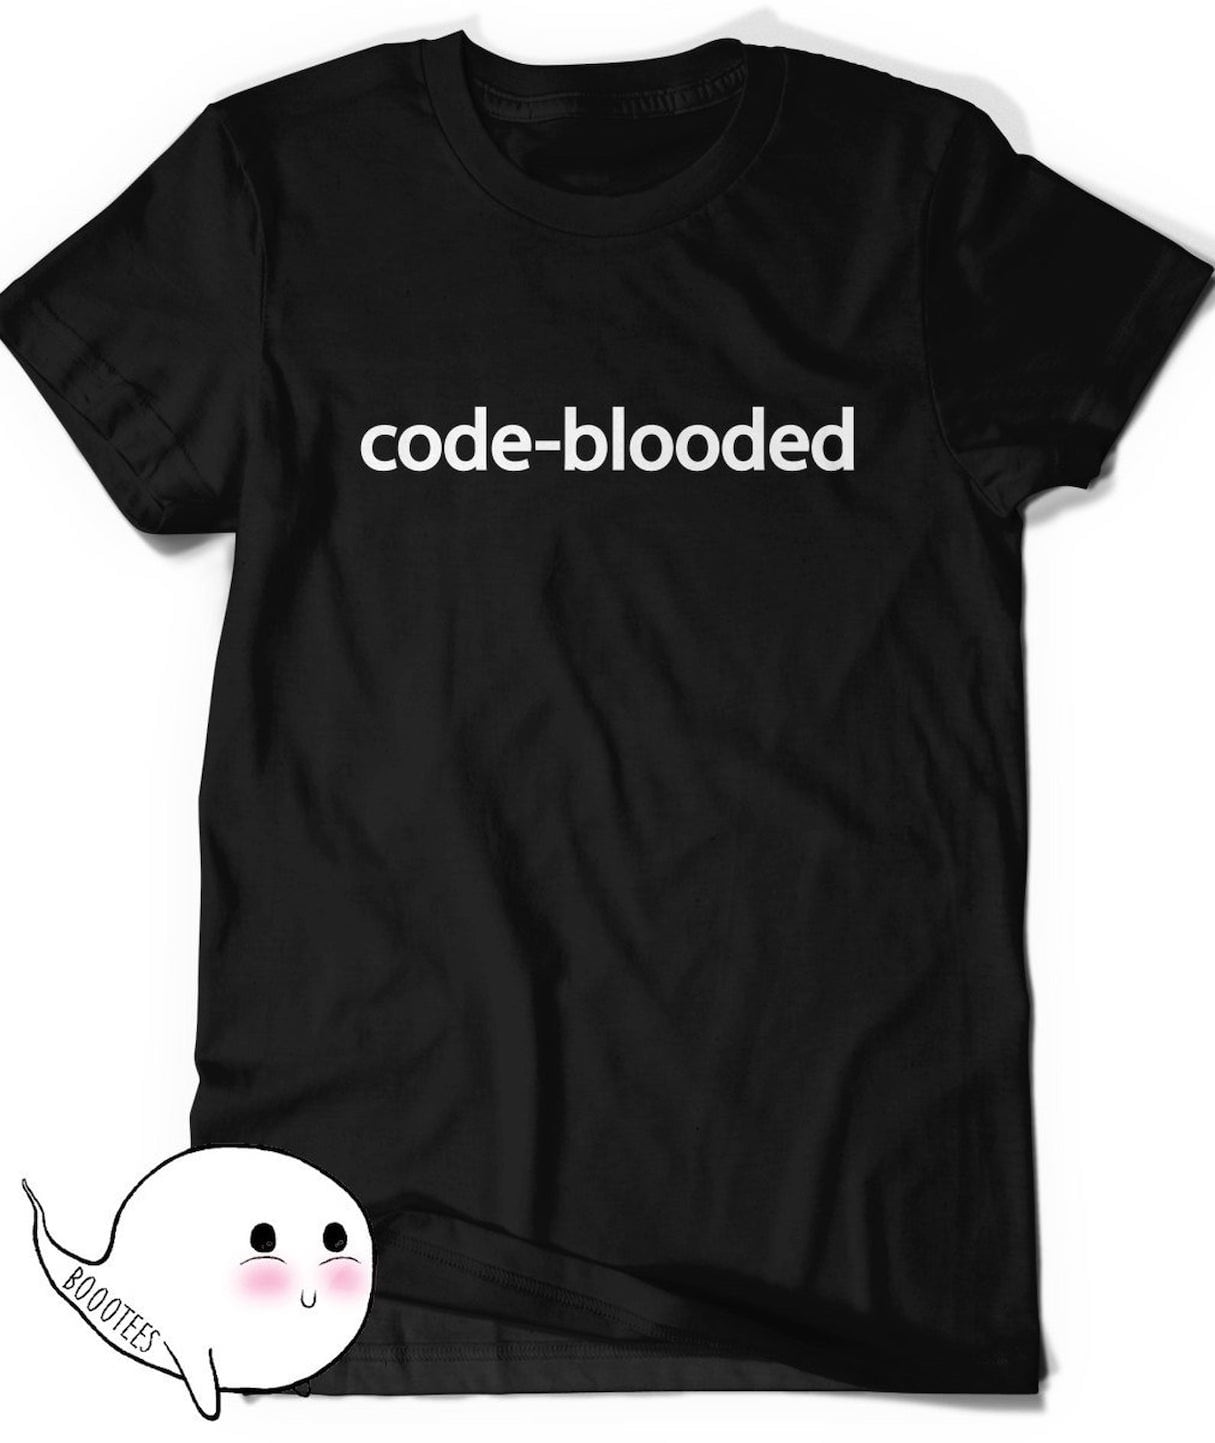 gifts for programmers: tshirt